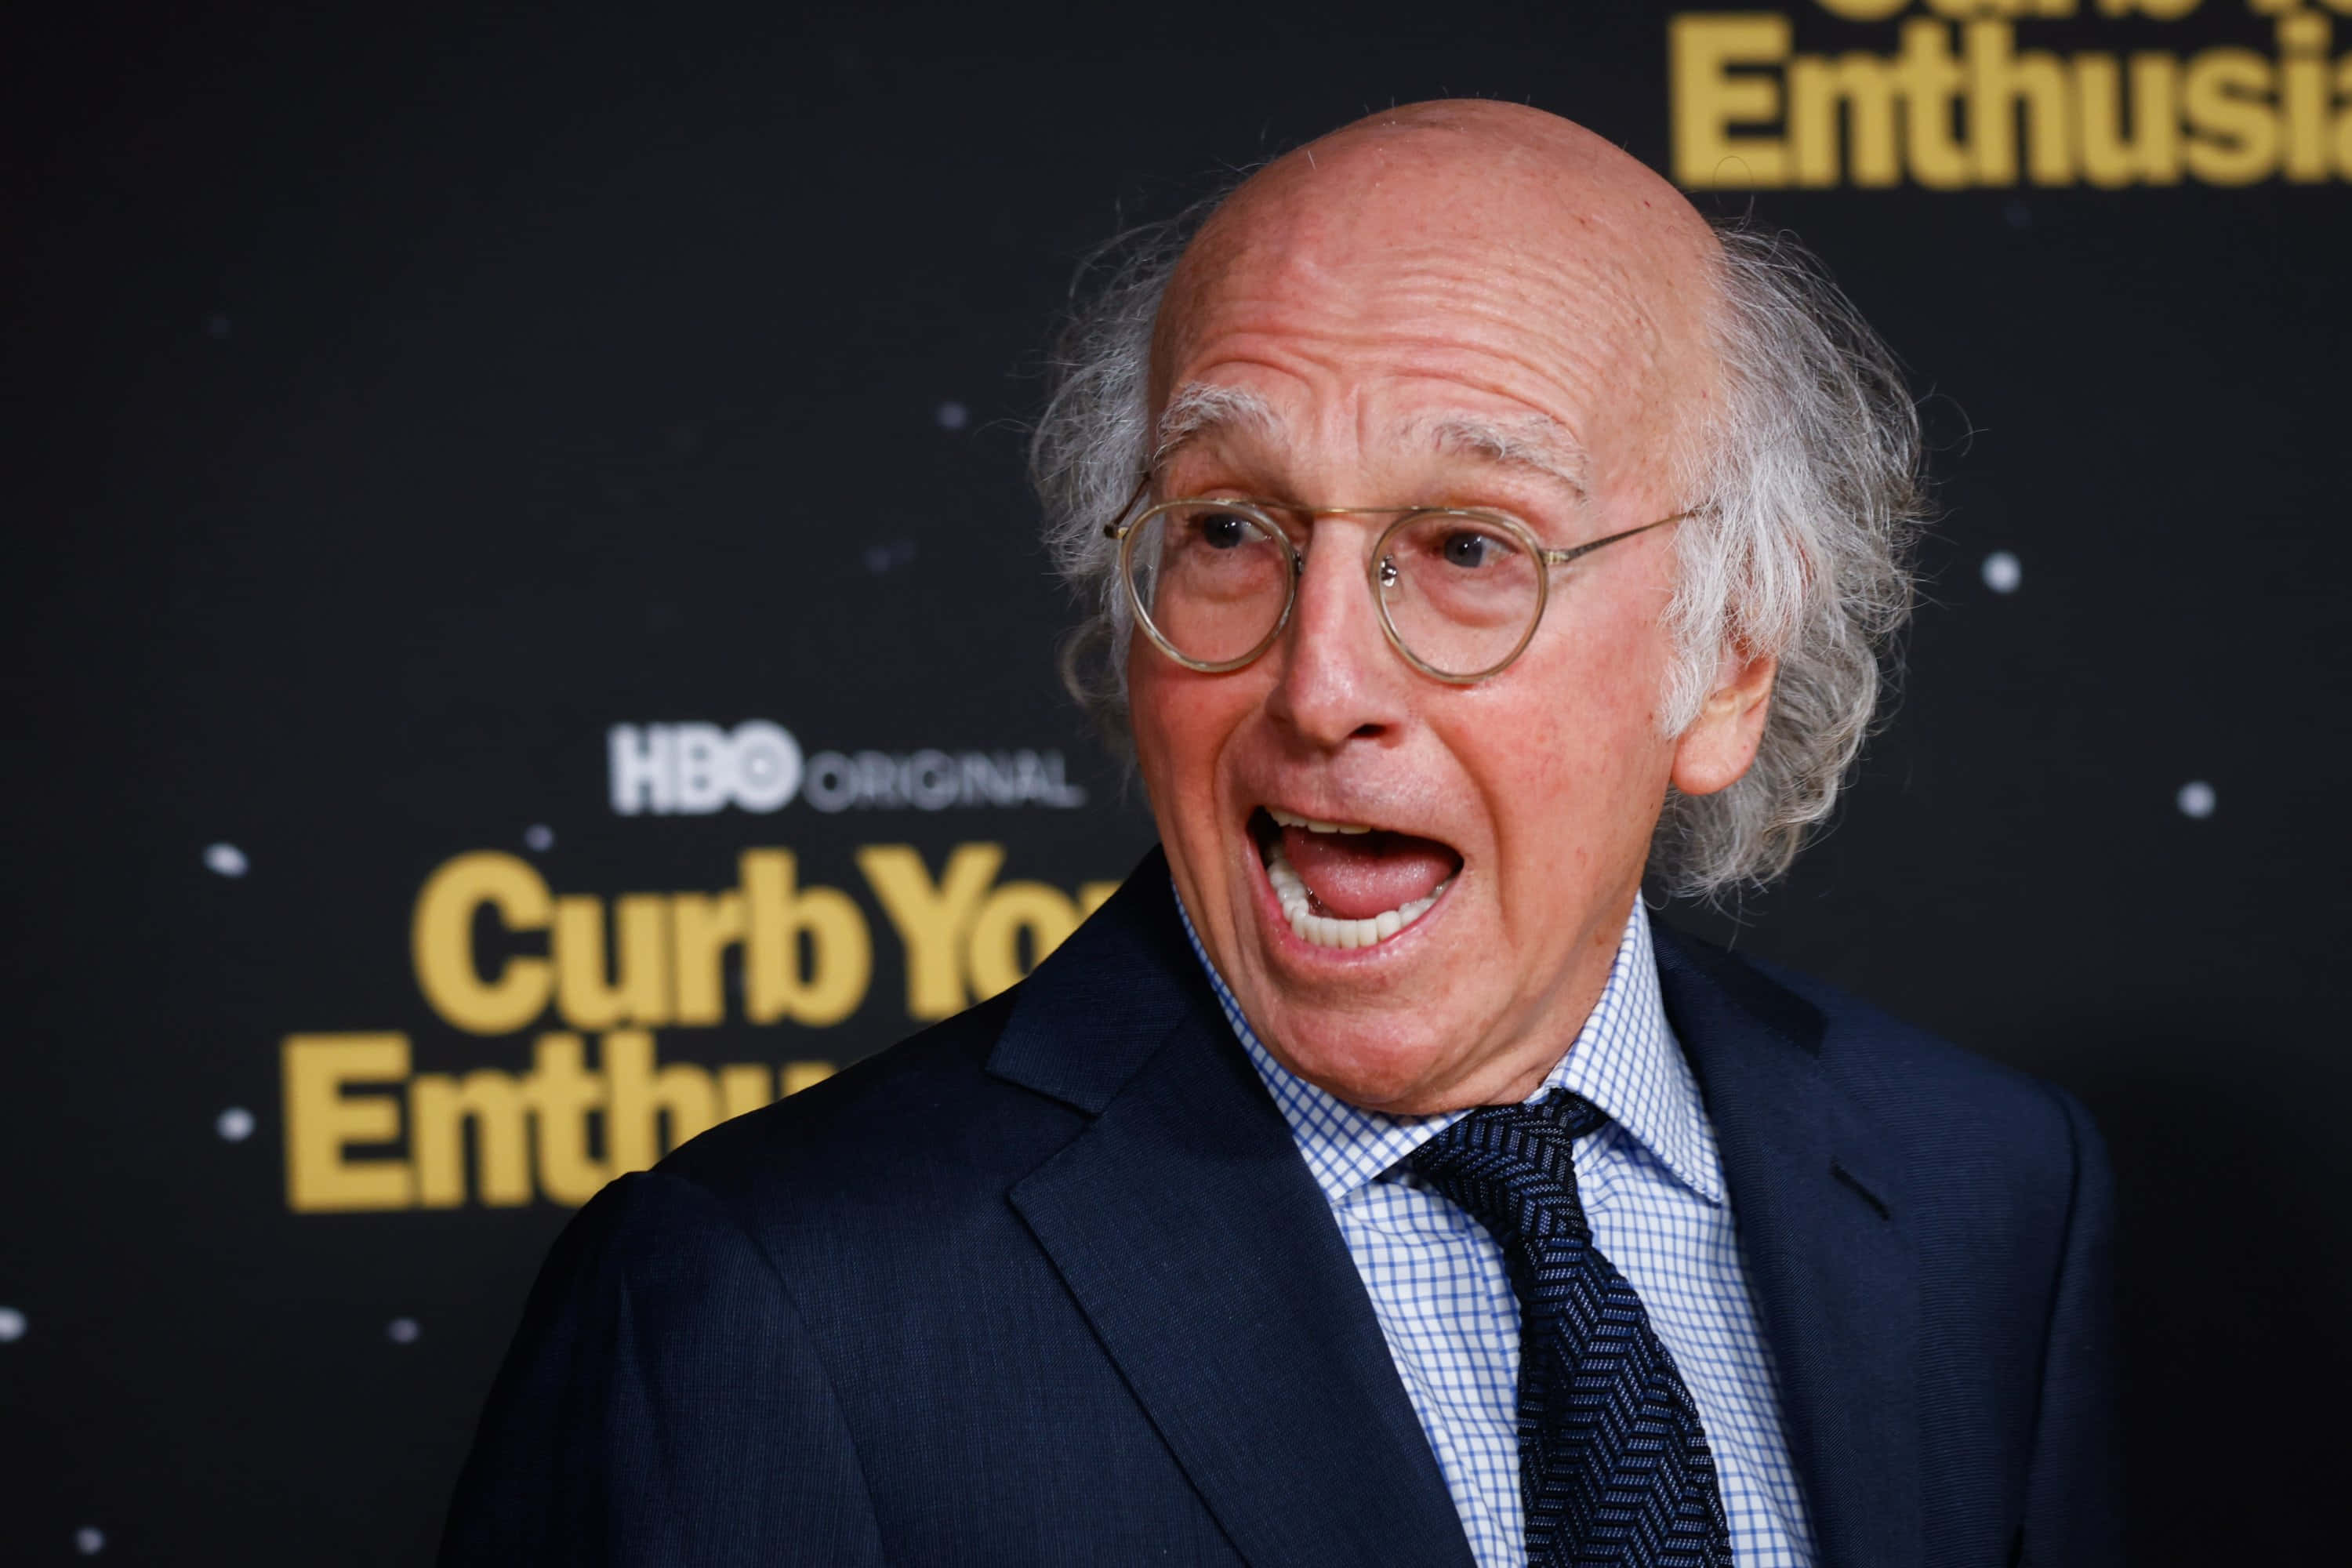 Larry David, Famous Actor, Writer And Producer Background